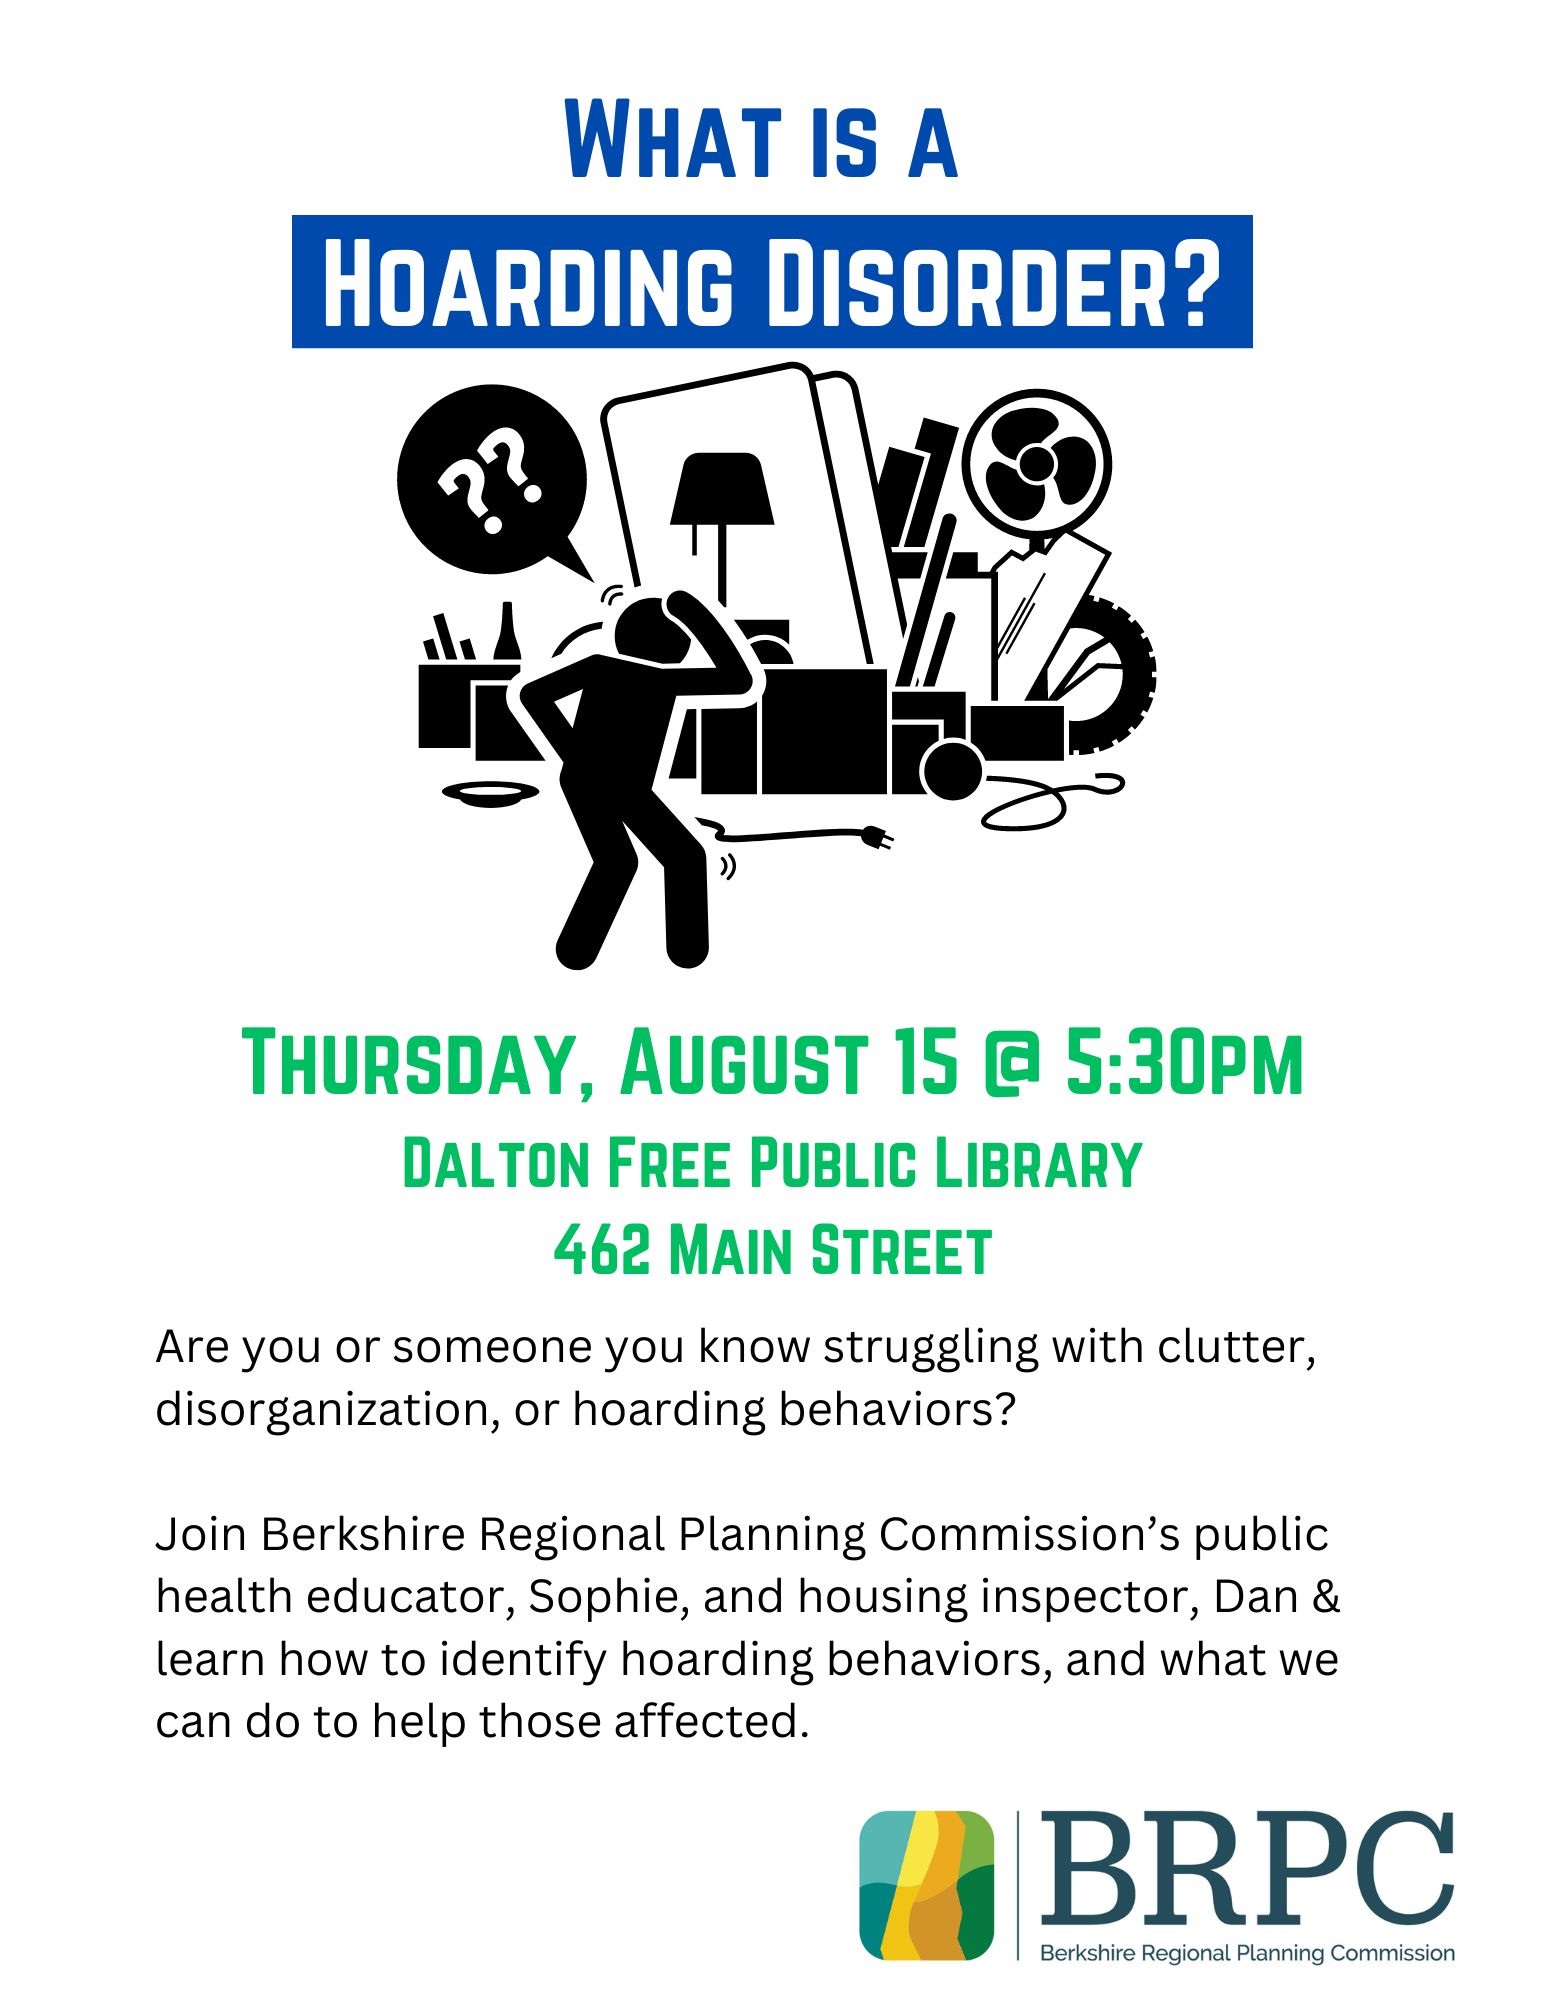 Learn More About Hoarding Disorders on August 15th